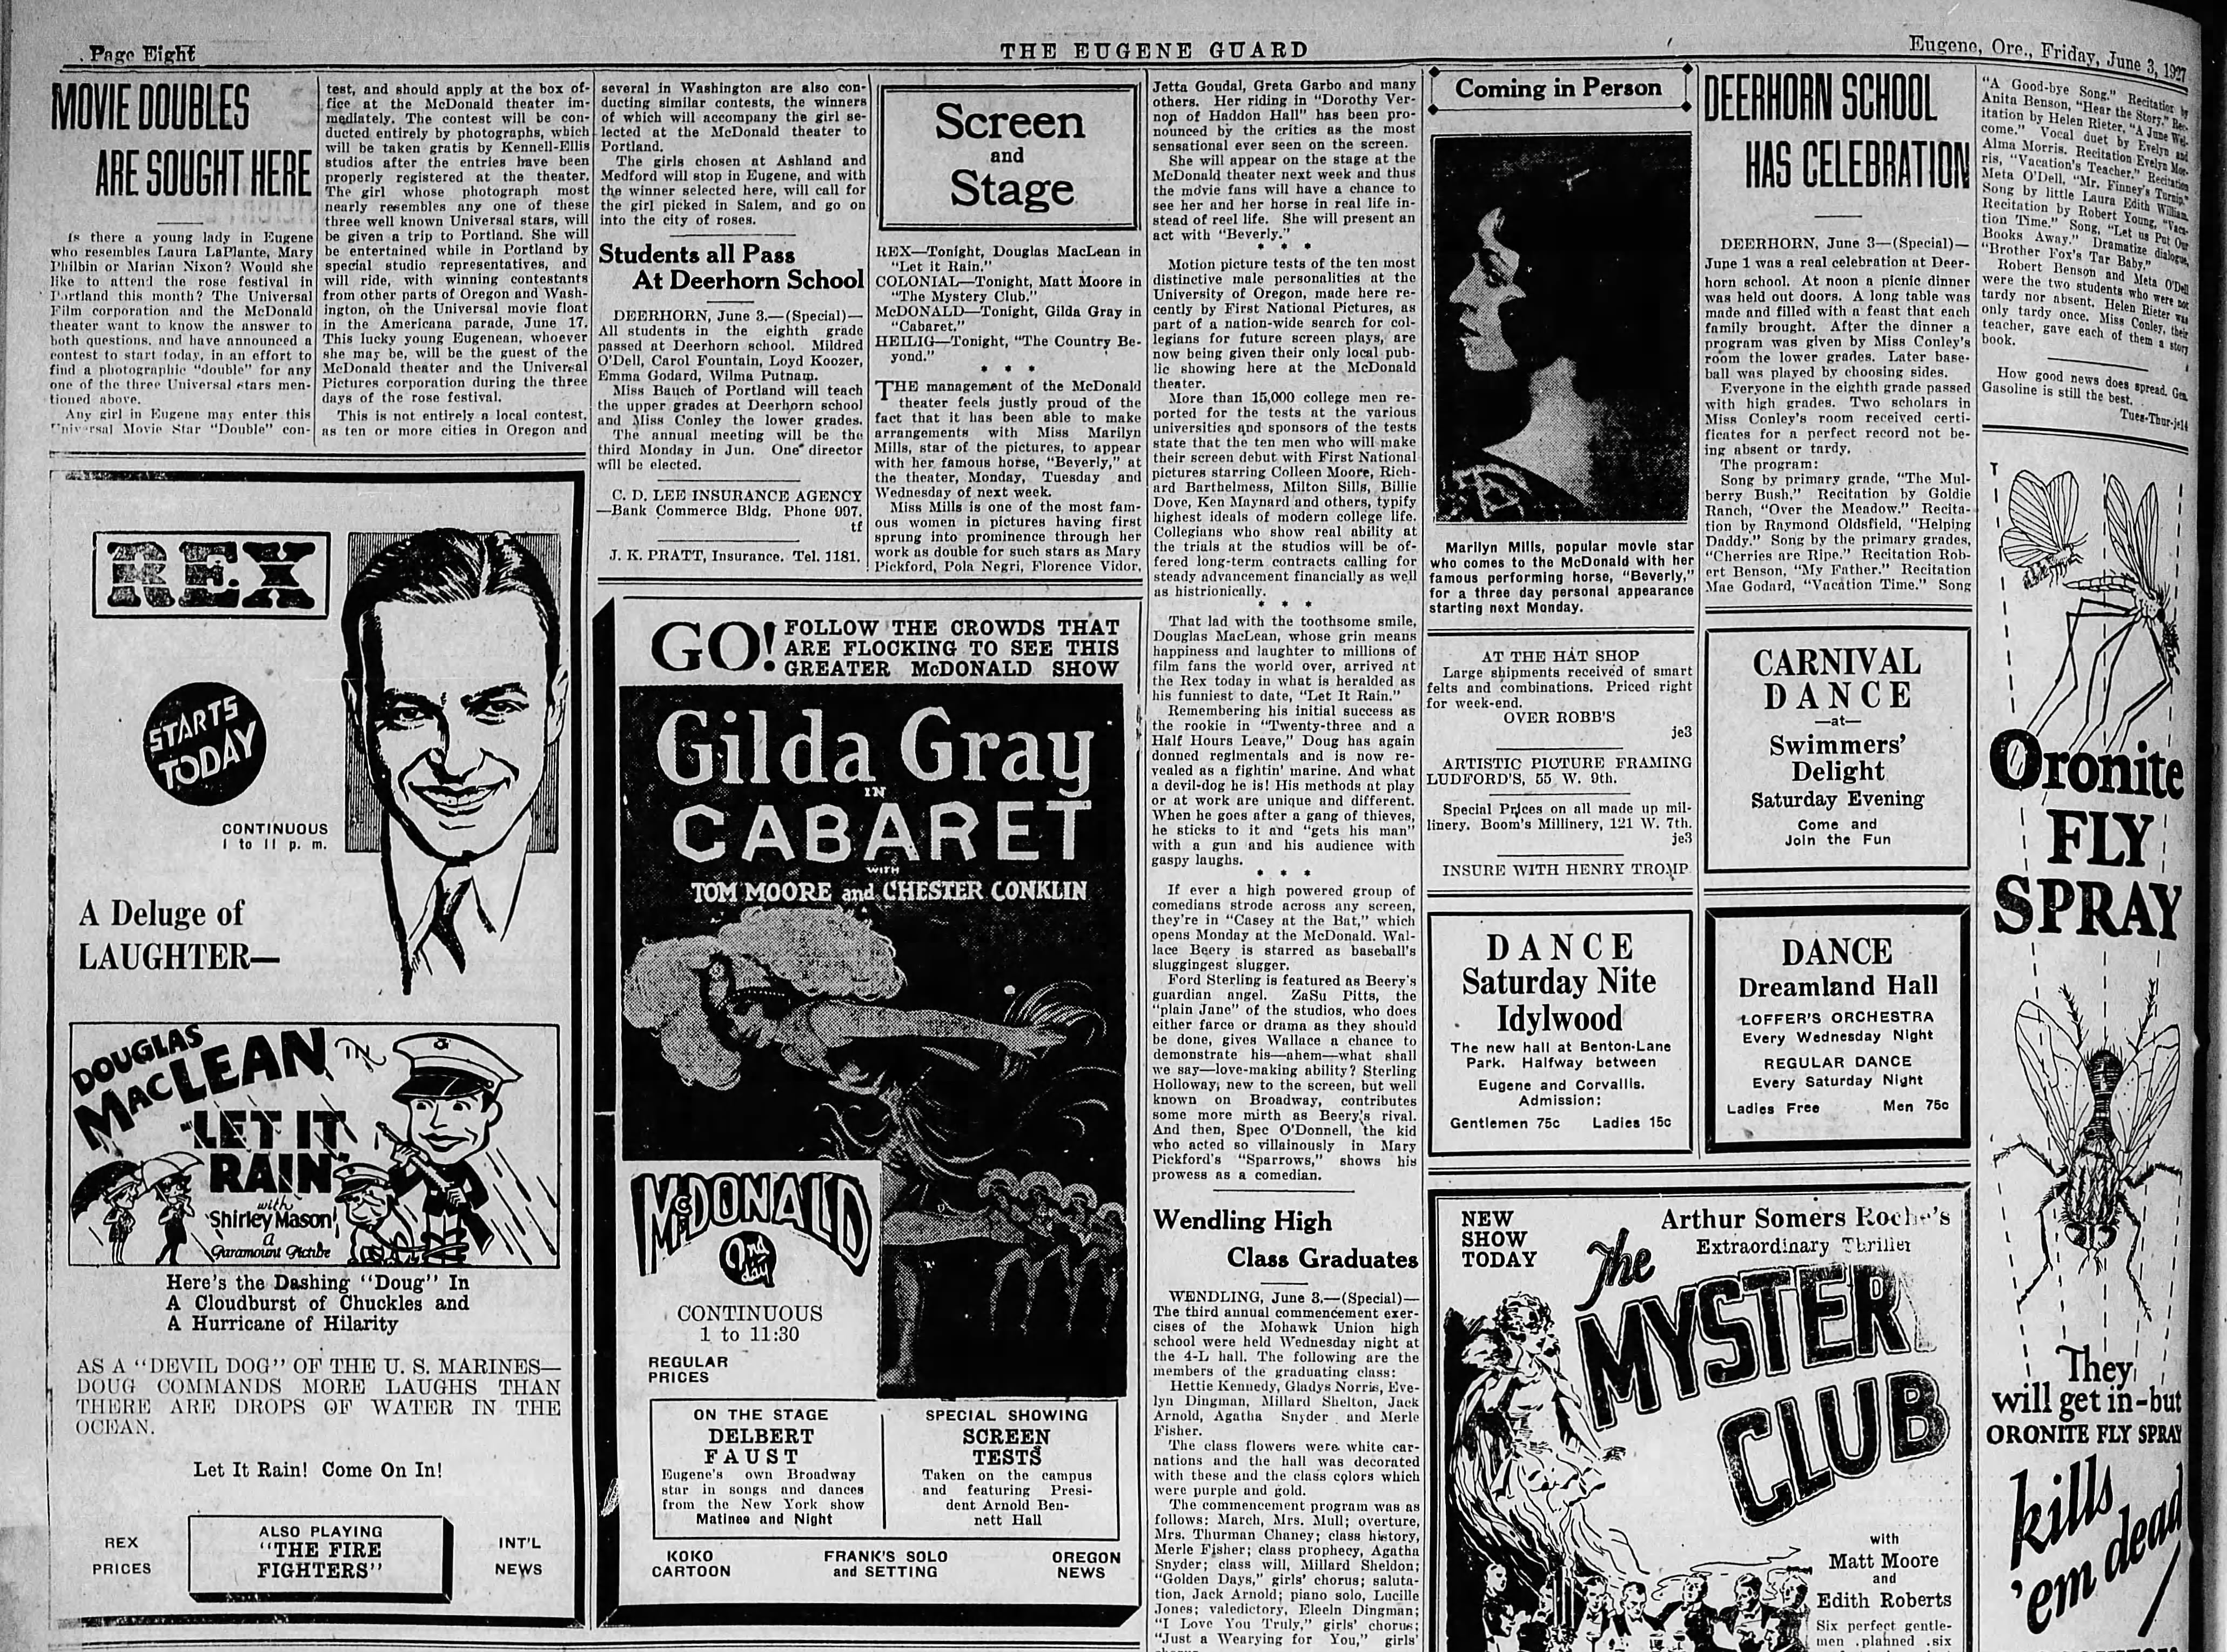 This Article covers events pertaining to the McDonald Theater on June 3rd 1927